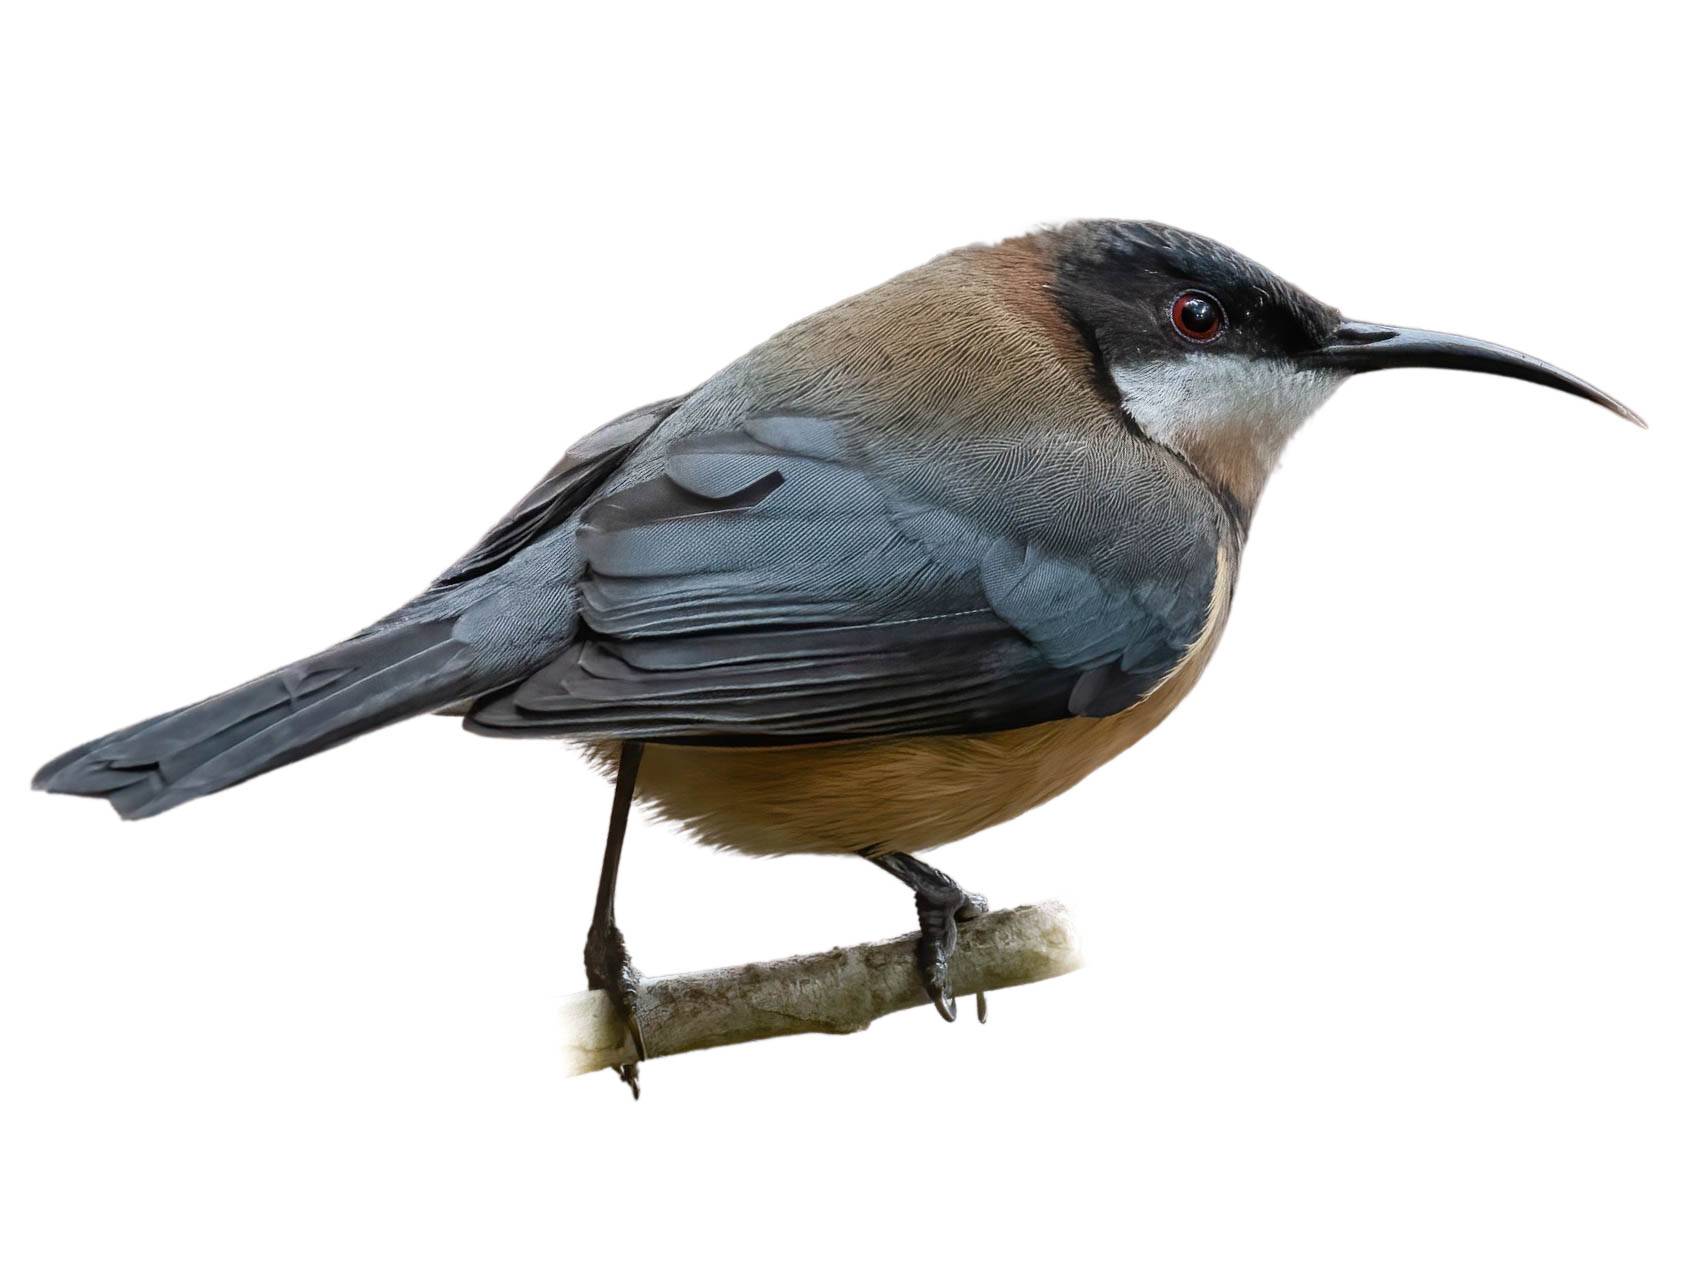 A photo of a Eastern Spinebill (Acanthorhynchus tenuirostris)